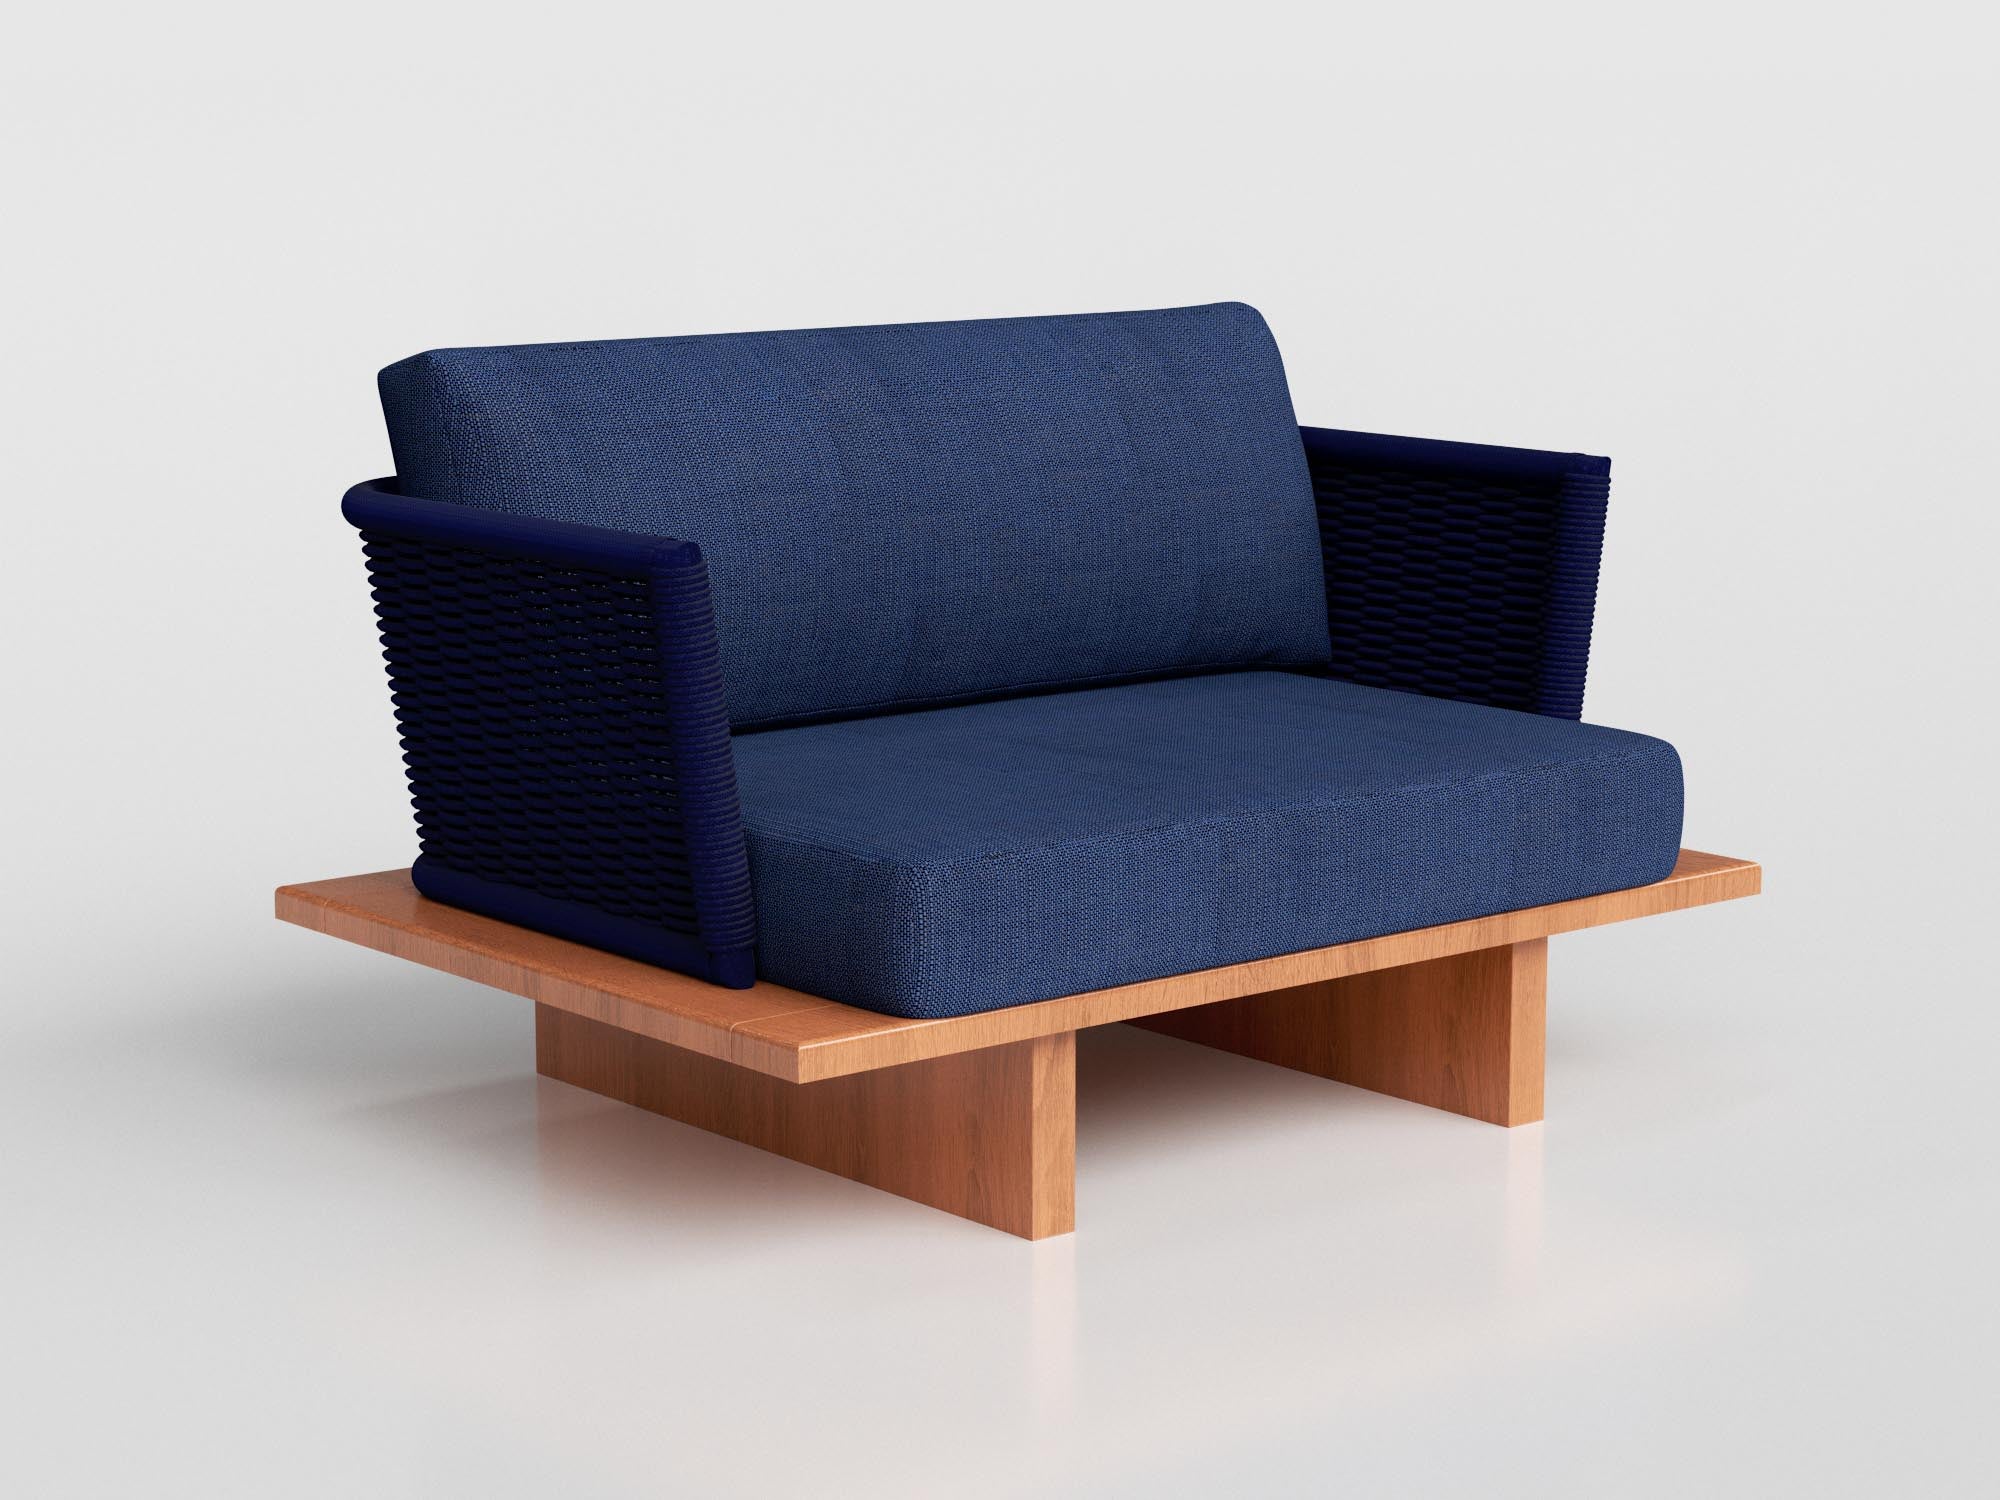 Fusion Loveseat in nautical rope and wood estruture, designed by Maria Candida Machado